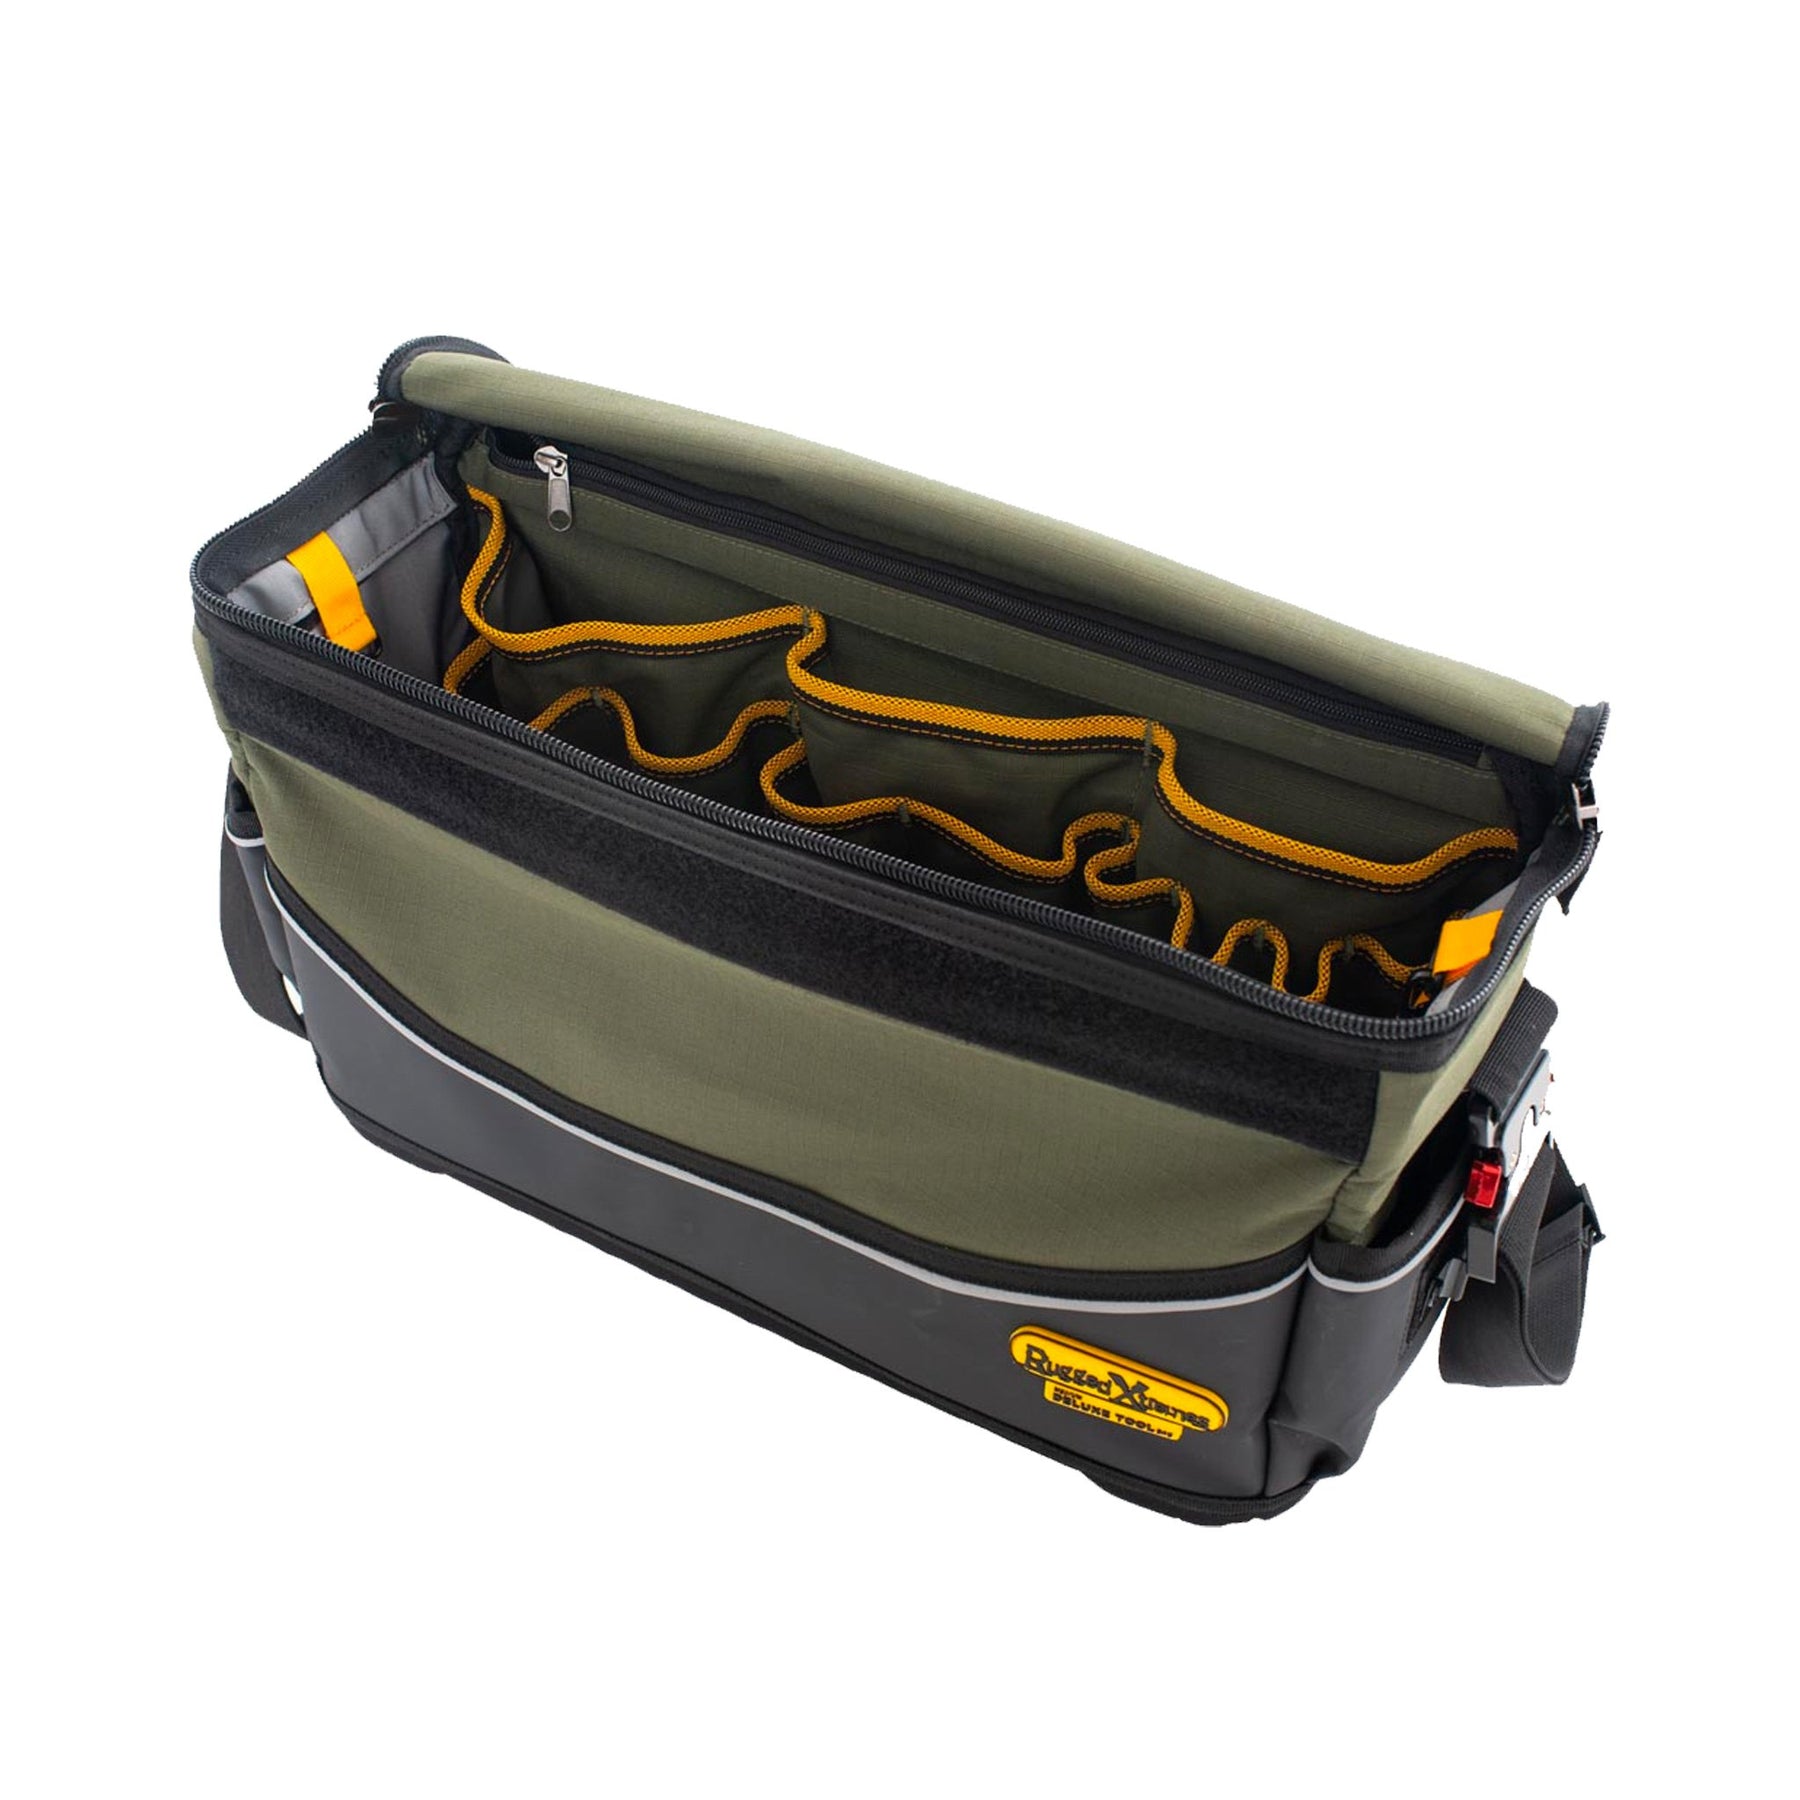 inside green and black medium deluxe canvas tool bag 